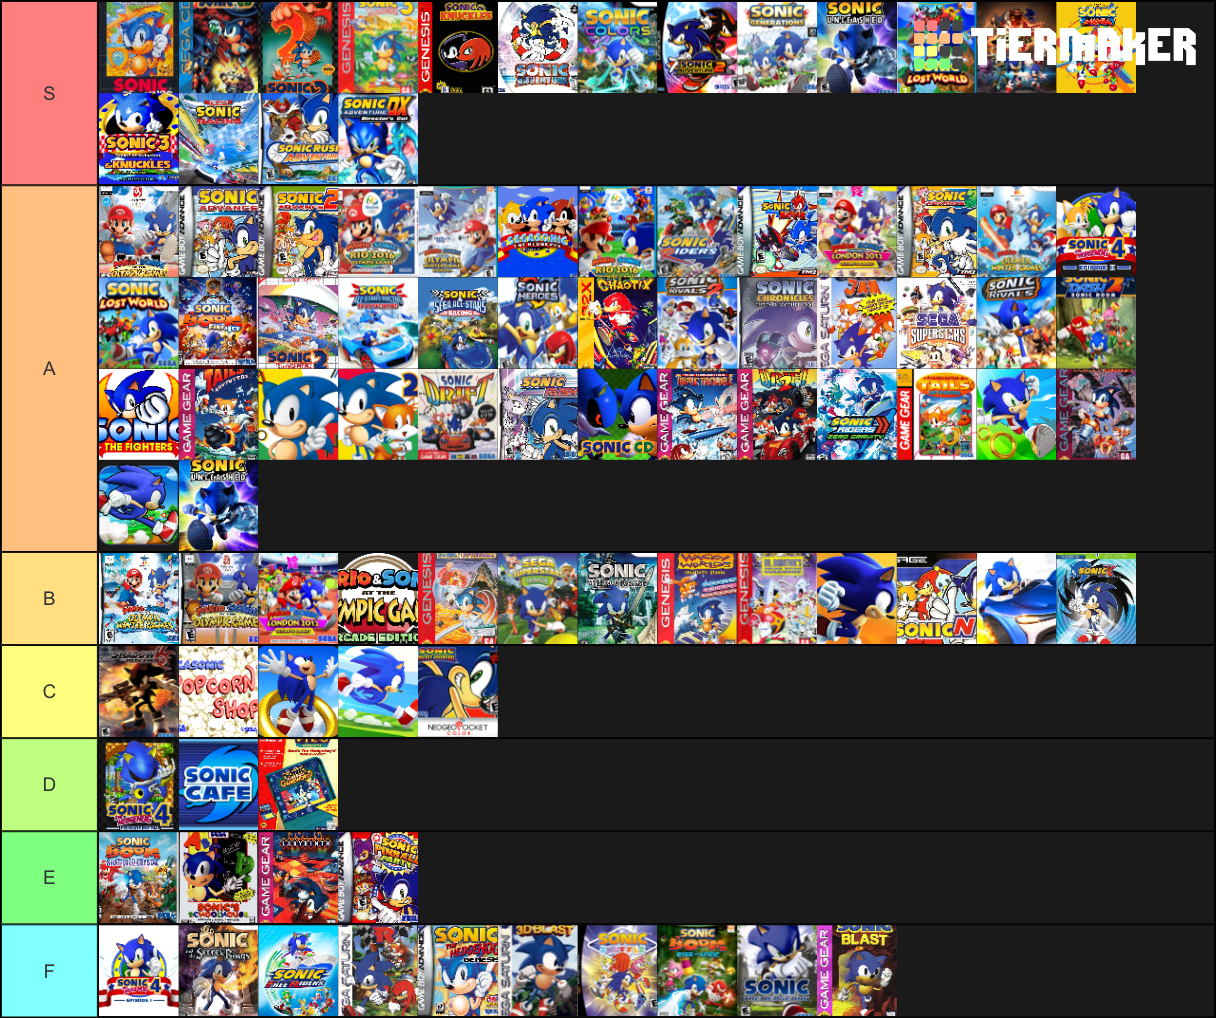 My tier list for Sonic games - sonic the hedgehog post - Imgur